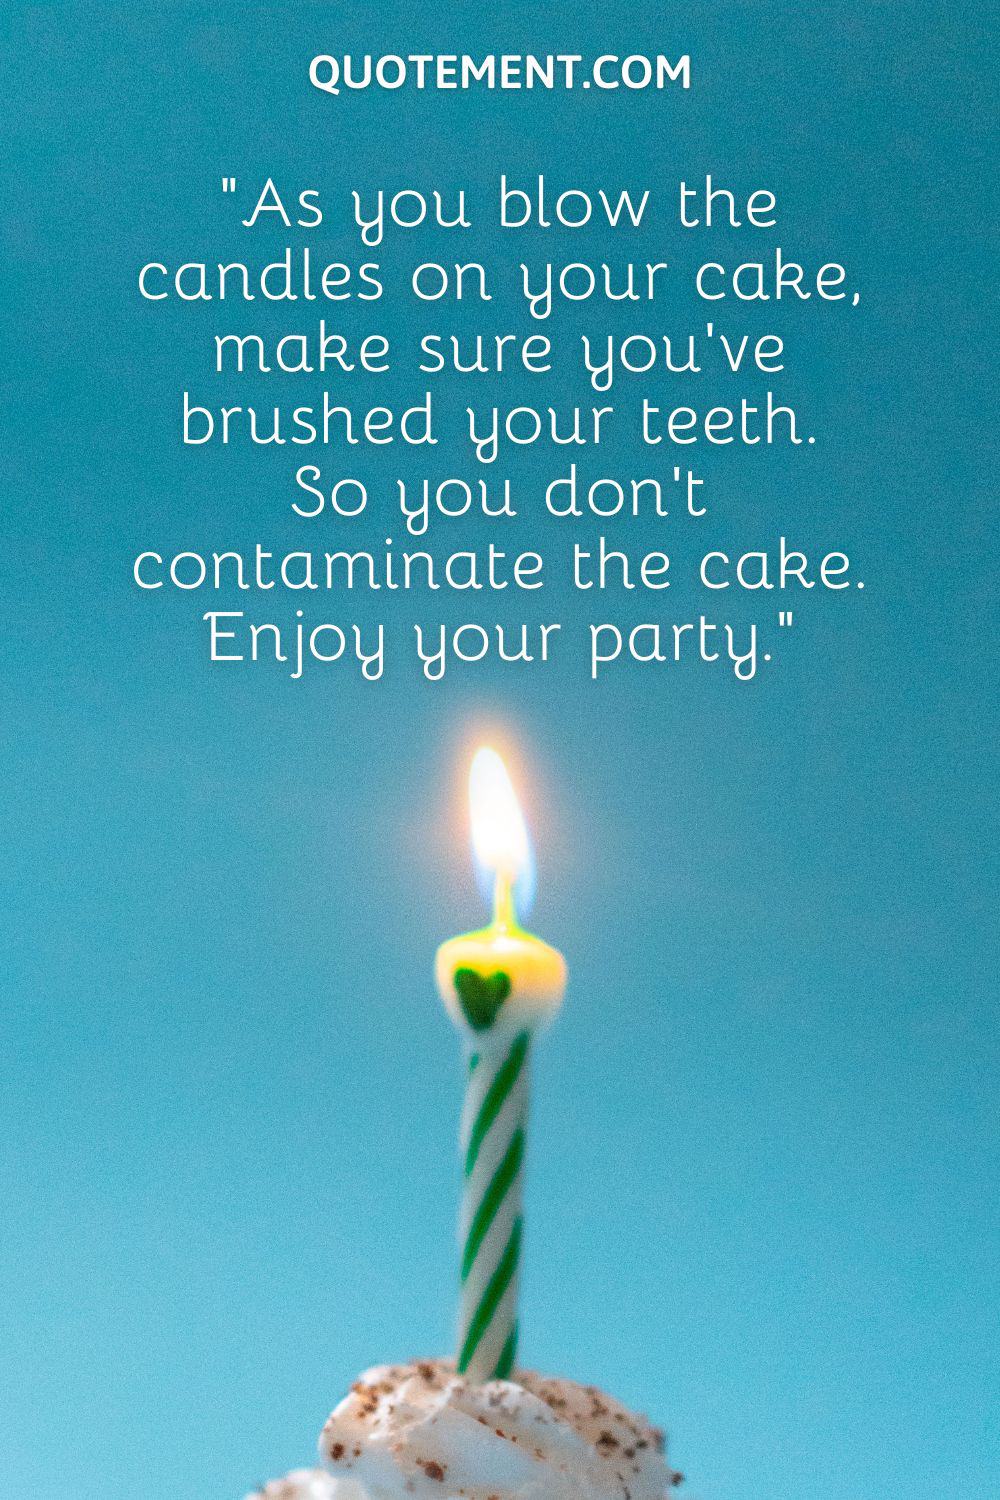 “As you blow the candles on your cake, make sure you’ve brushed your teeth. So you don’t contaminate the cake. Enjoy your party.”